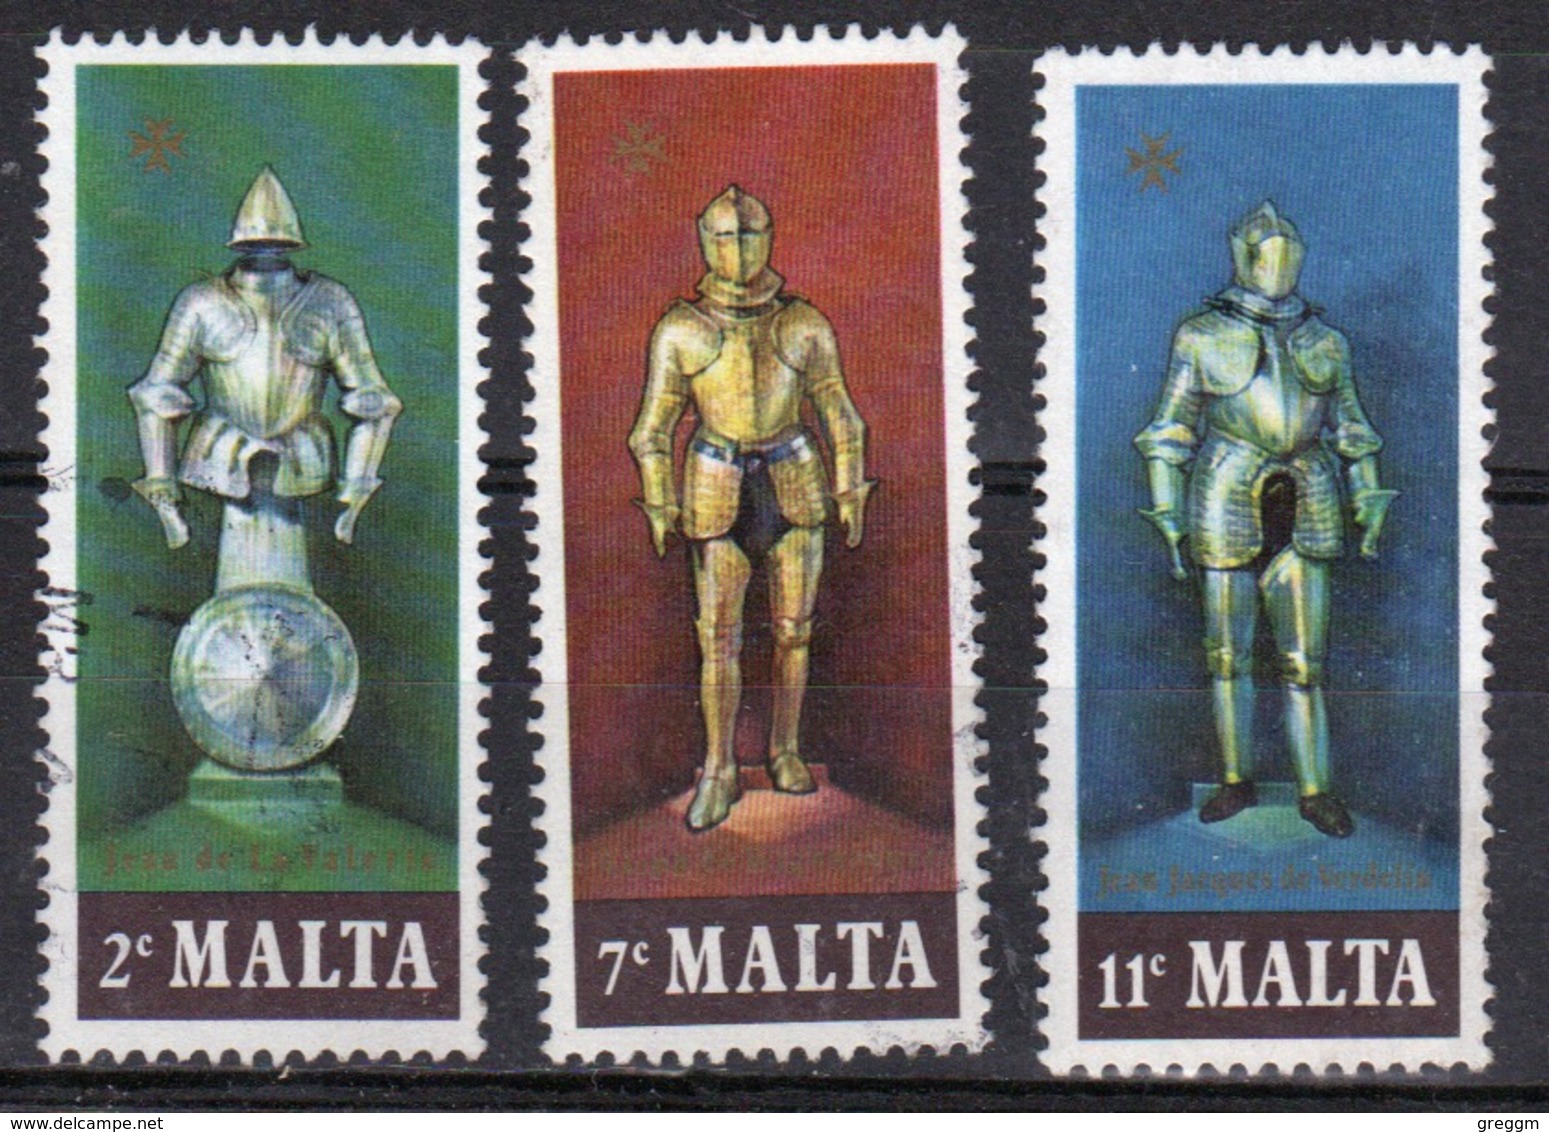 Malta 1977 Complete Set Of Stamps To Celebrate Suits Of Armour - Malta